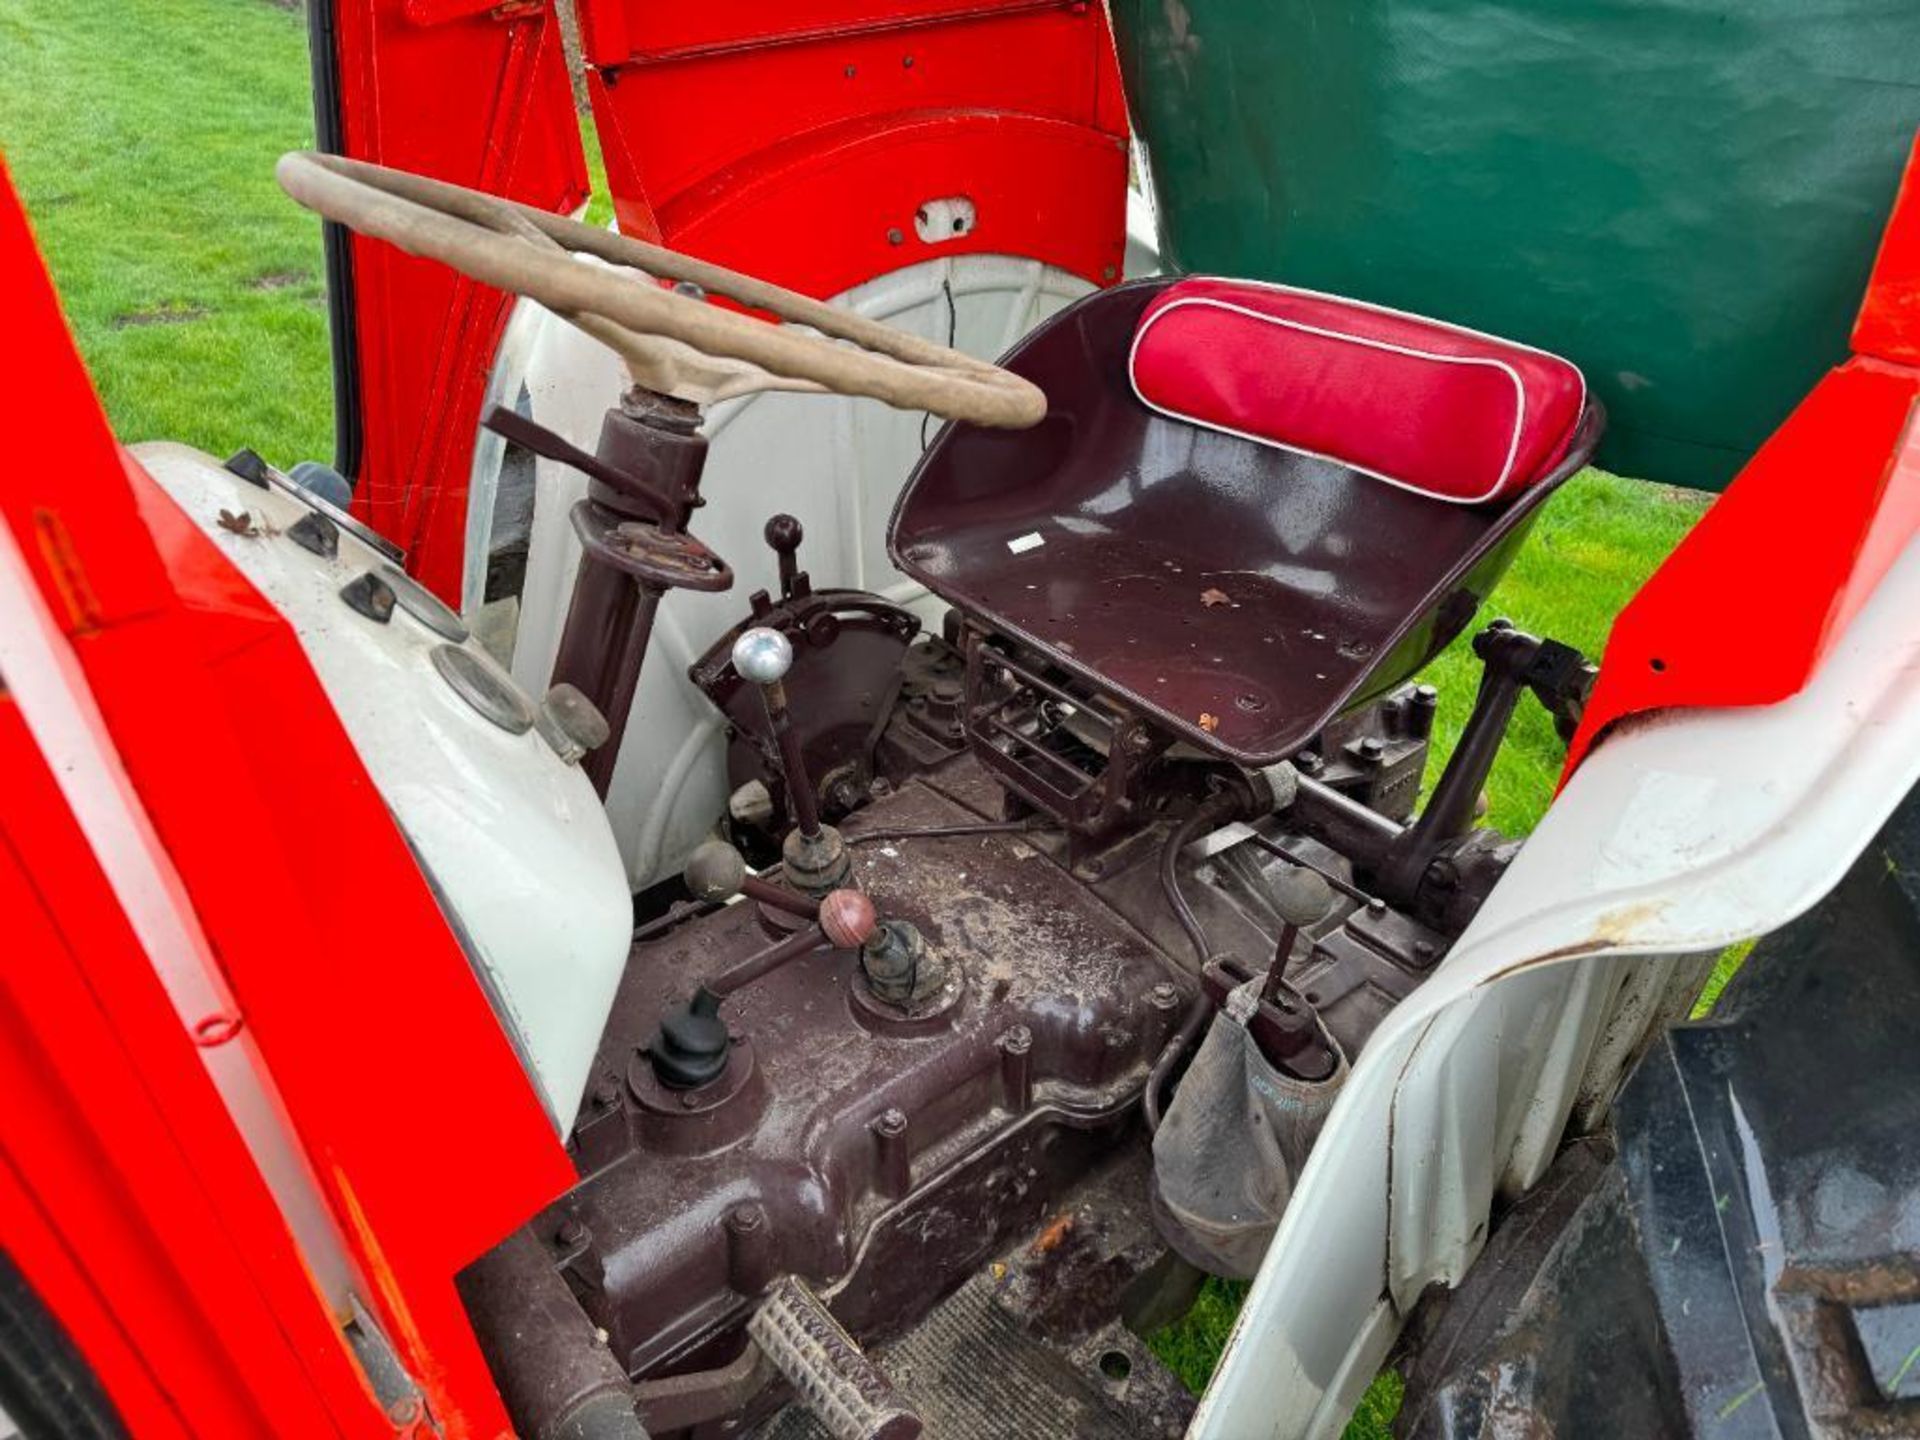 1968 David Brown 880 Selectamatic 2wd diesel tractor with canvas cab, rear hydraulic valve, PTO, rea - Image 16 of 19